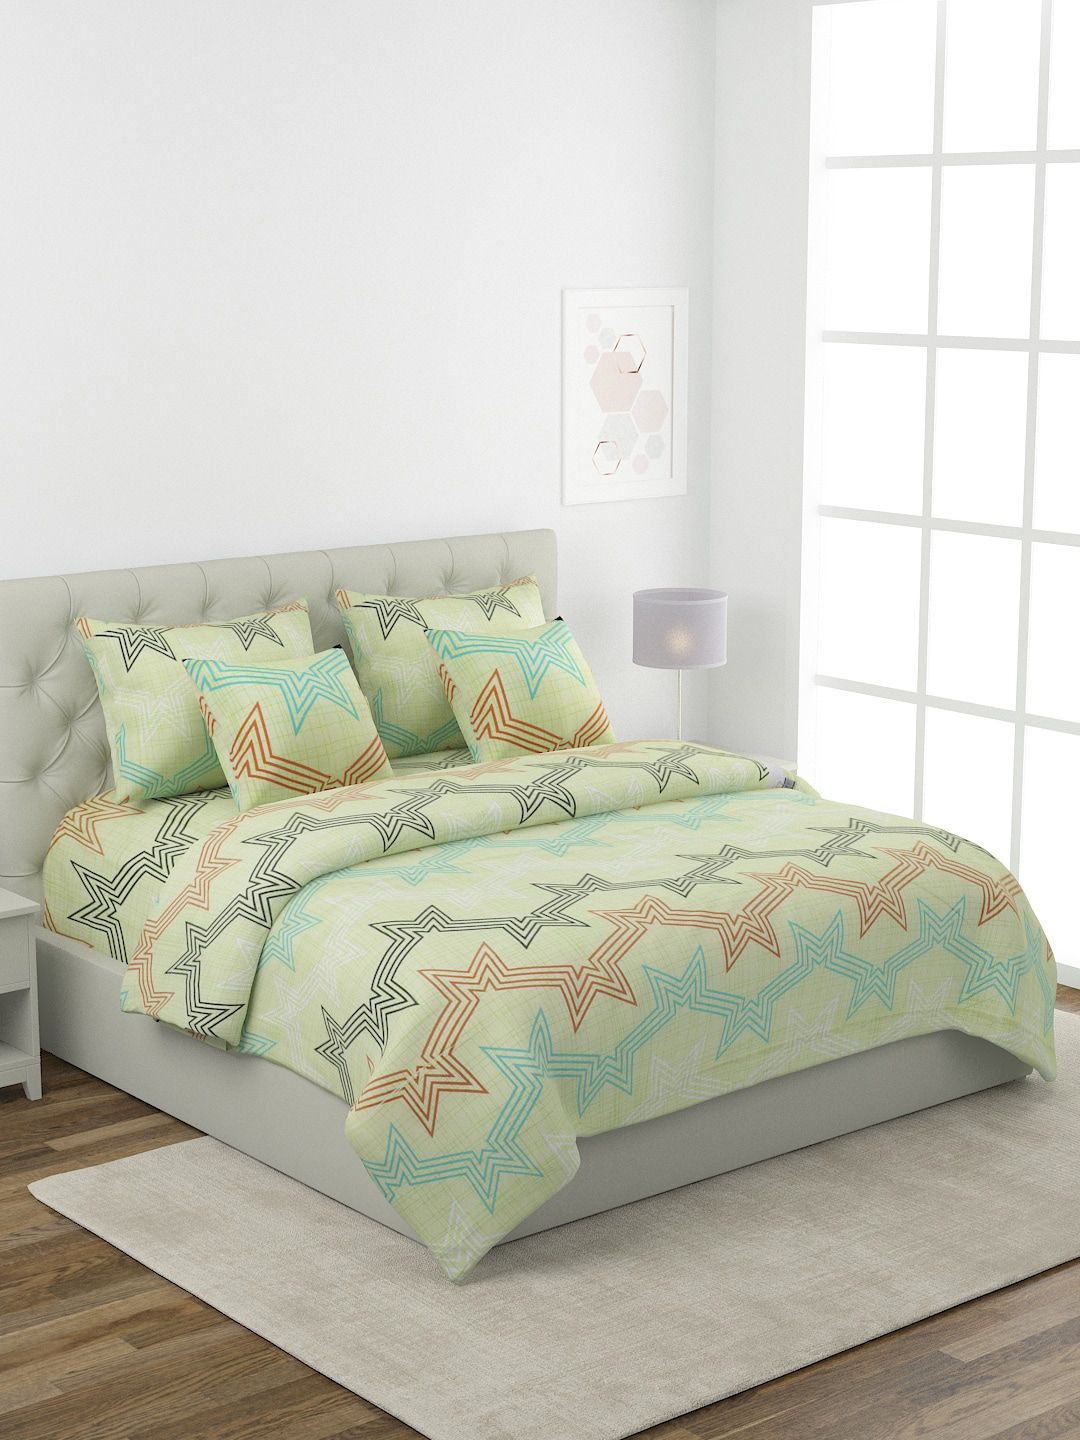 ROMEE Green & Black Printed Pure Cotton Superfine Double King Bedding Set Price in India